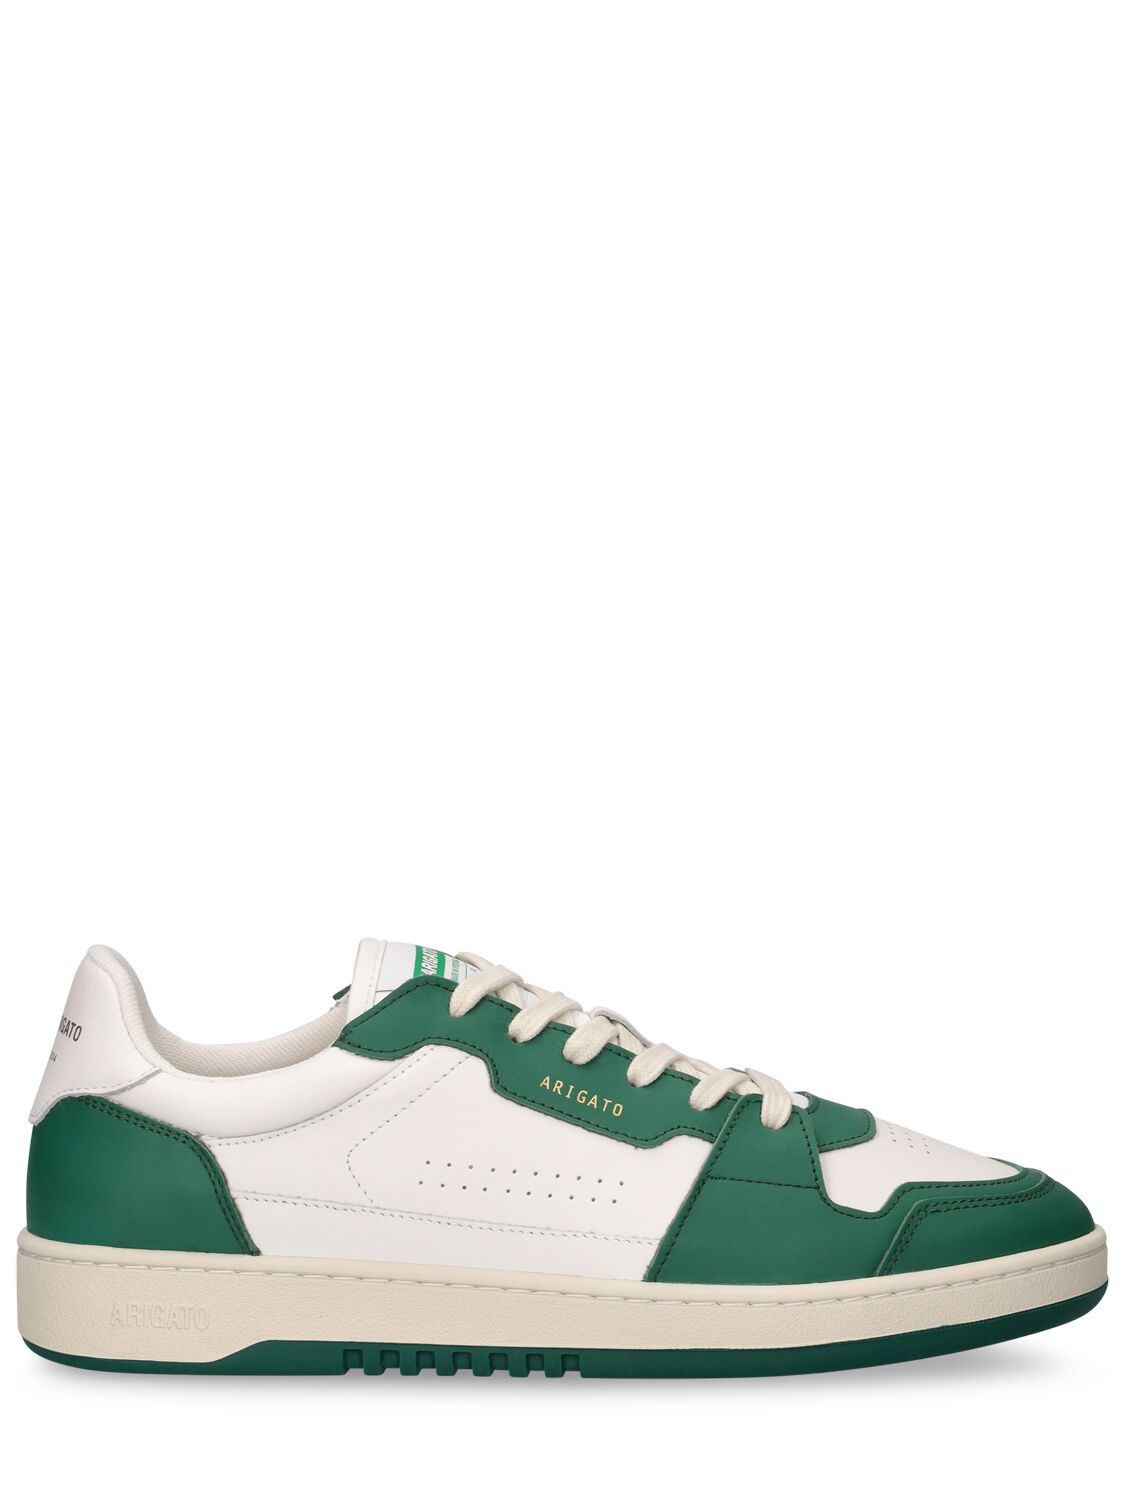 Axel Arigato Dice Low Leather Sneakers In White,green